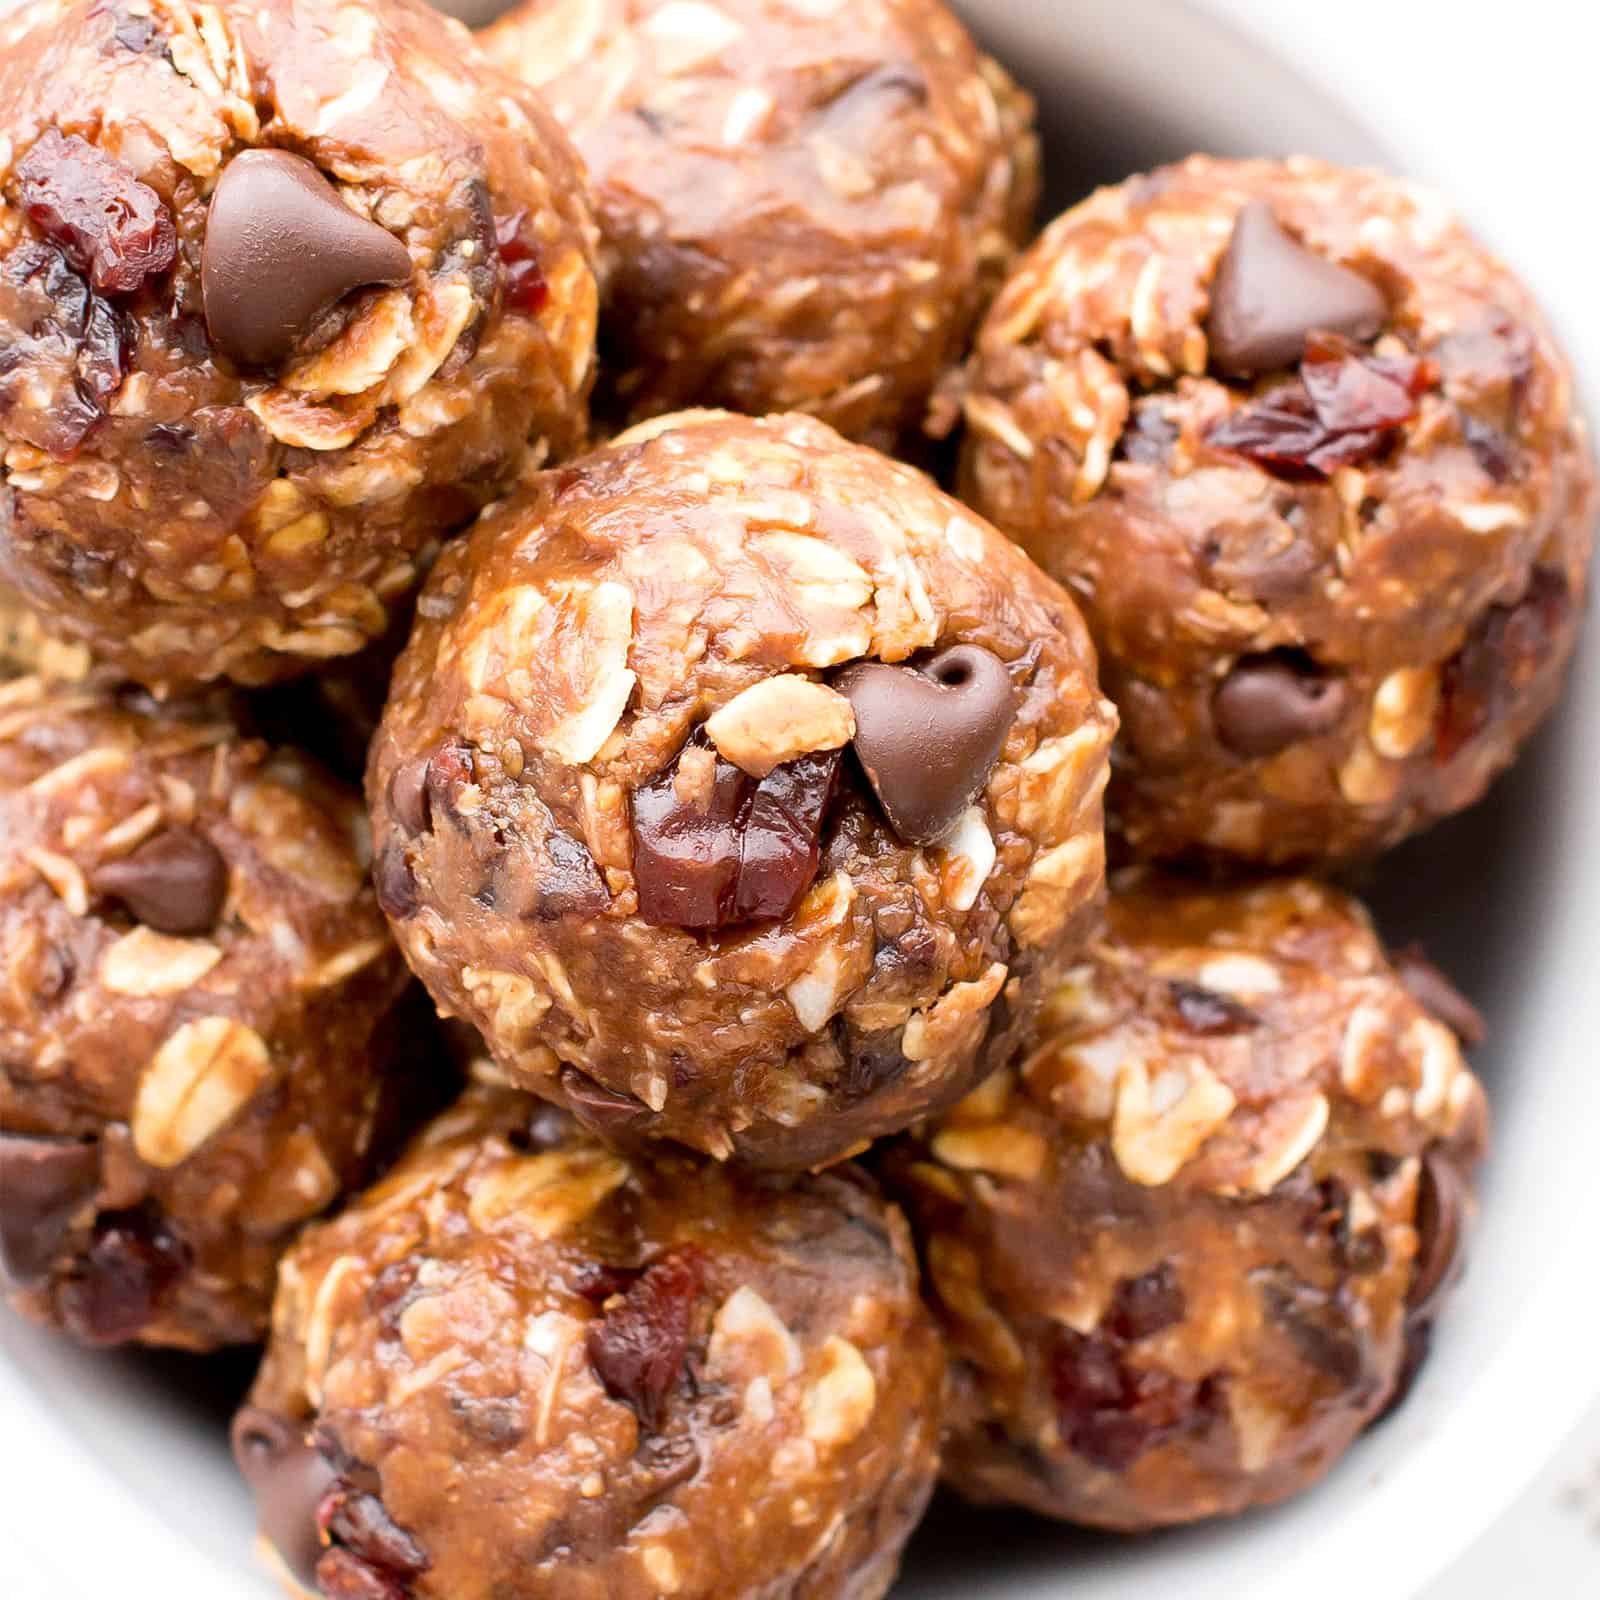 Chocolate Protein Energy Bites - Love to be in the Kitchen